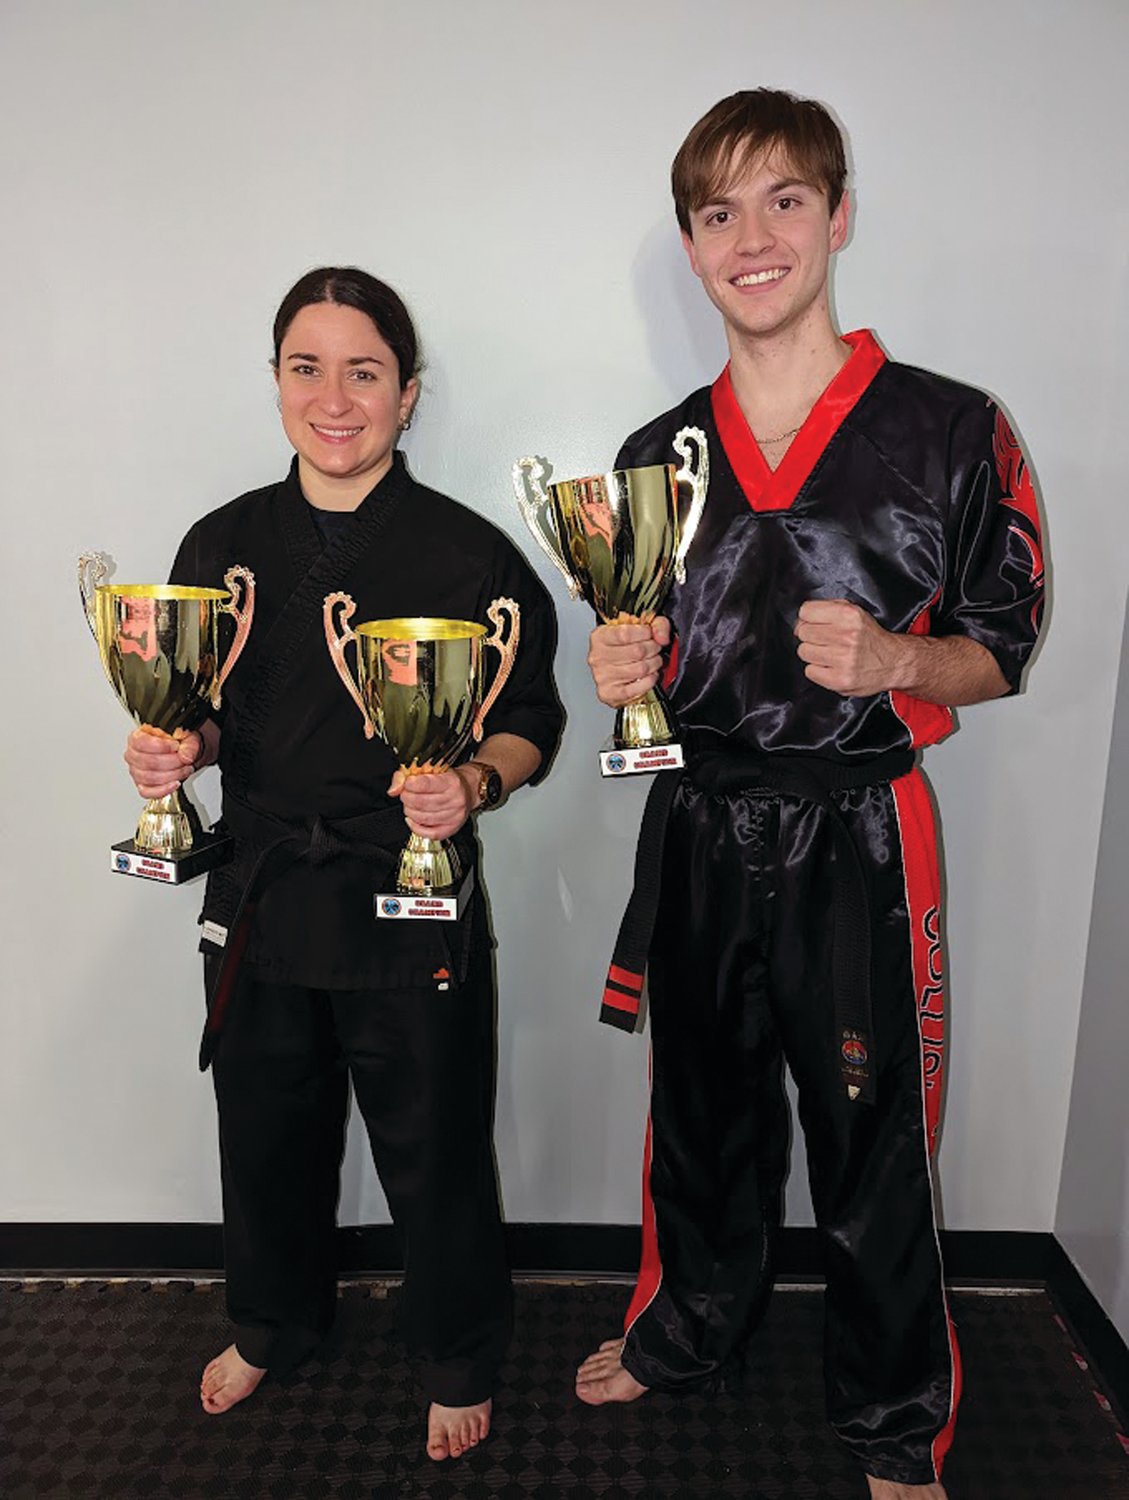 NATIONAL CHAMPS: Ashley Sacrey and Anthony Zangari, who took first place overall at the KRANE National Championships. (Submitted photo)